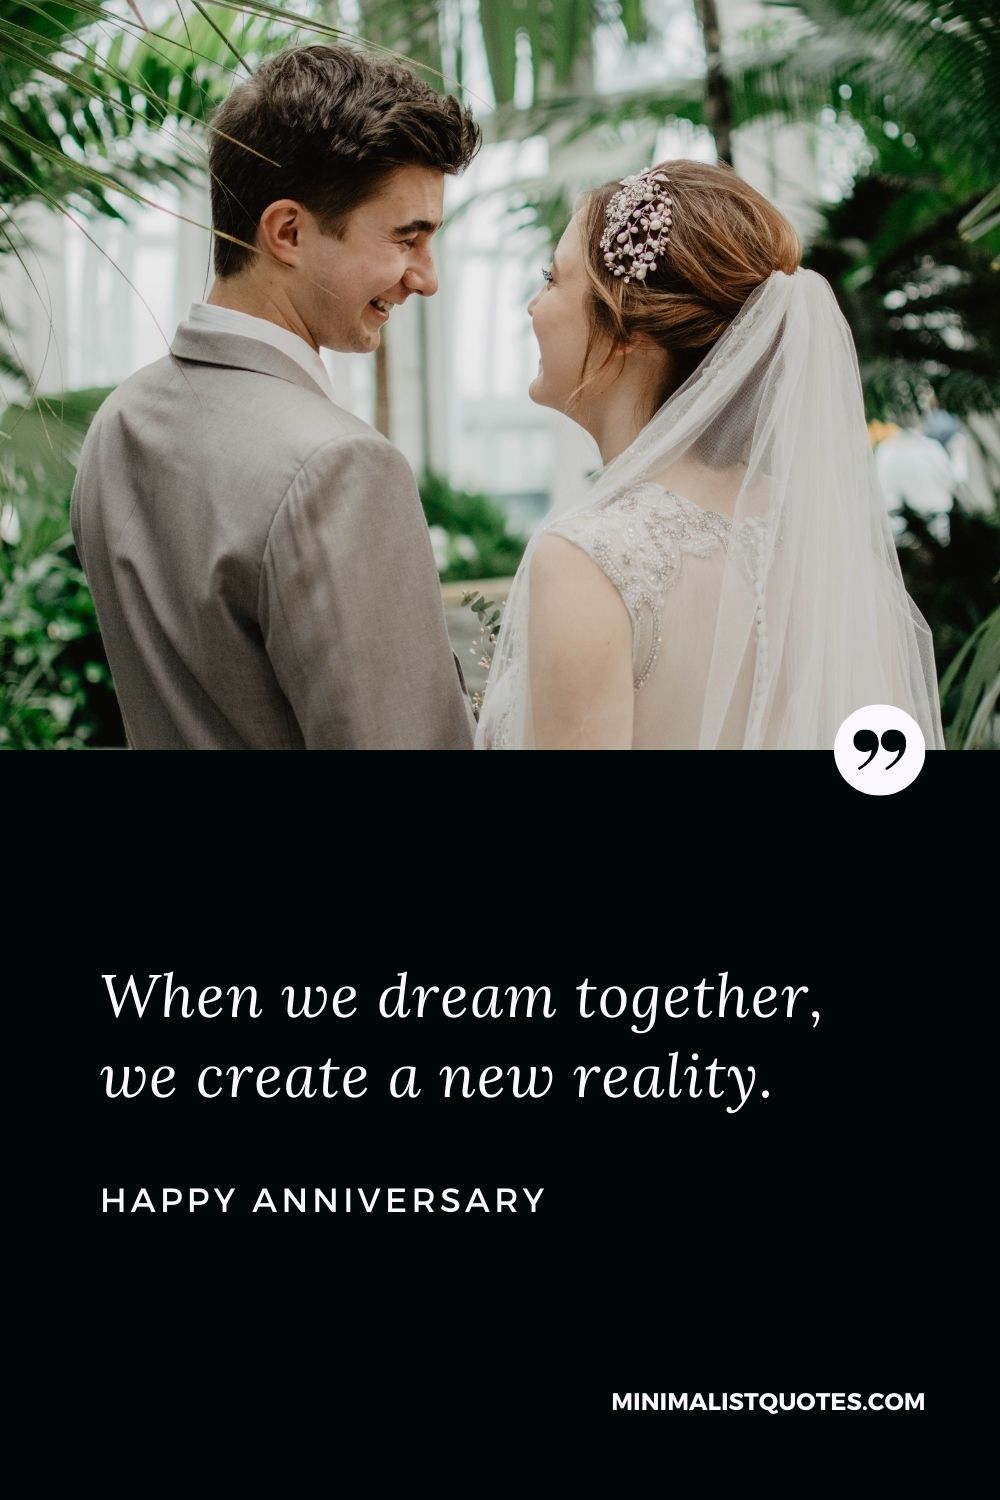 Anniversary Wish & Message With HD Image: When we dream together, we create a new reality. Happy Anniversary!